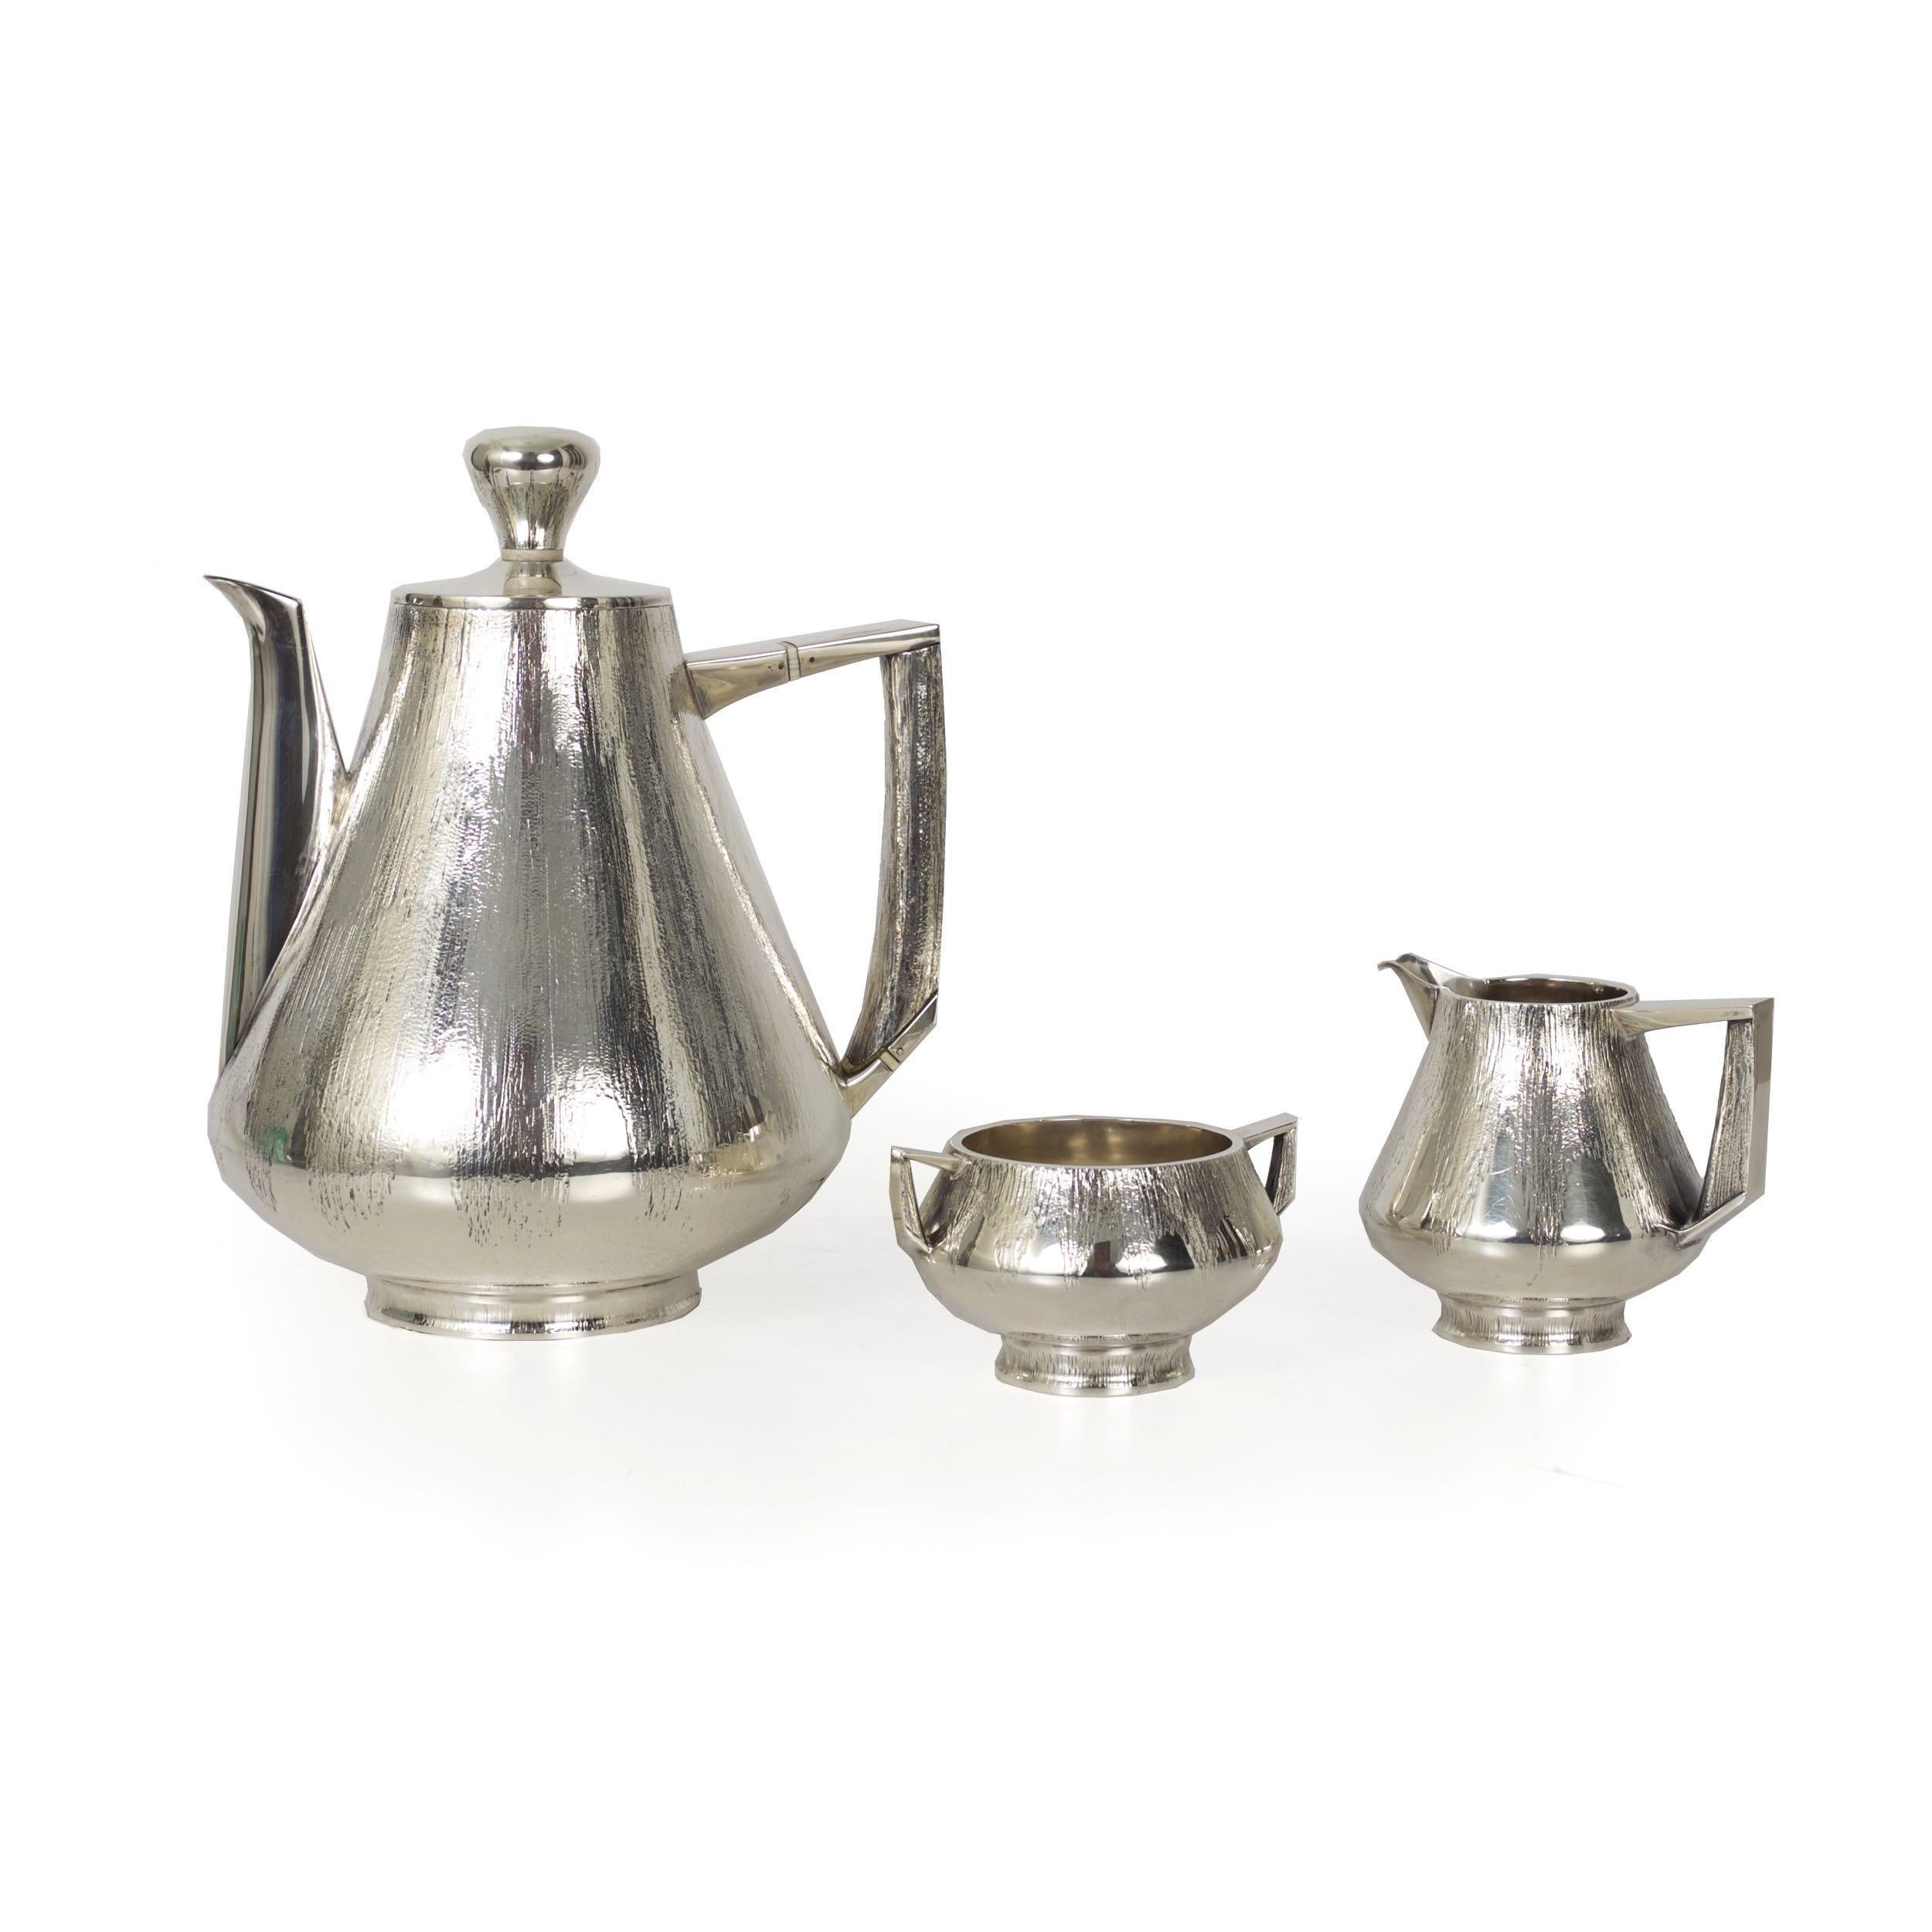 Late 20th Century Modernist Sterling Silver 3-Piece Tea or Coffee Service by Peter Lunn, London For Sale